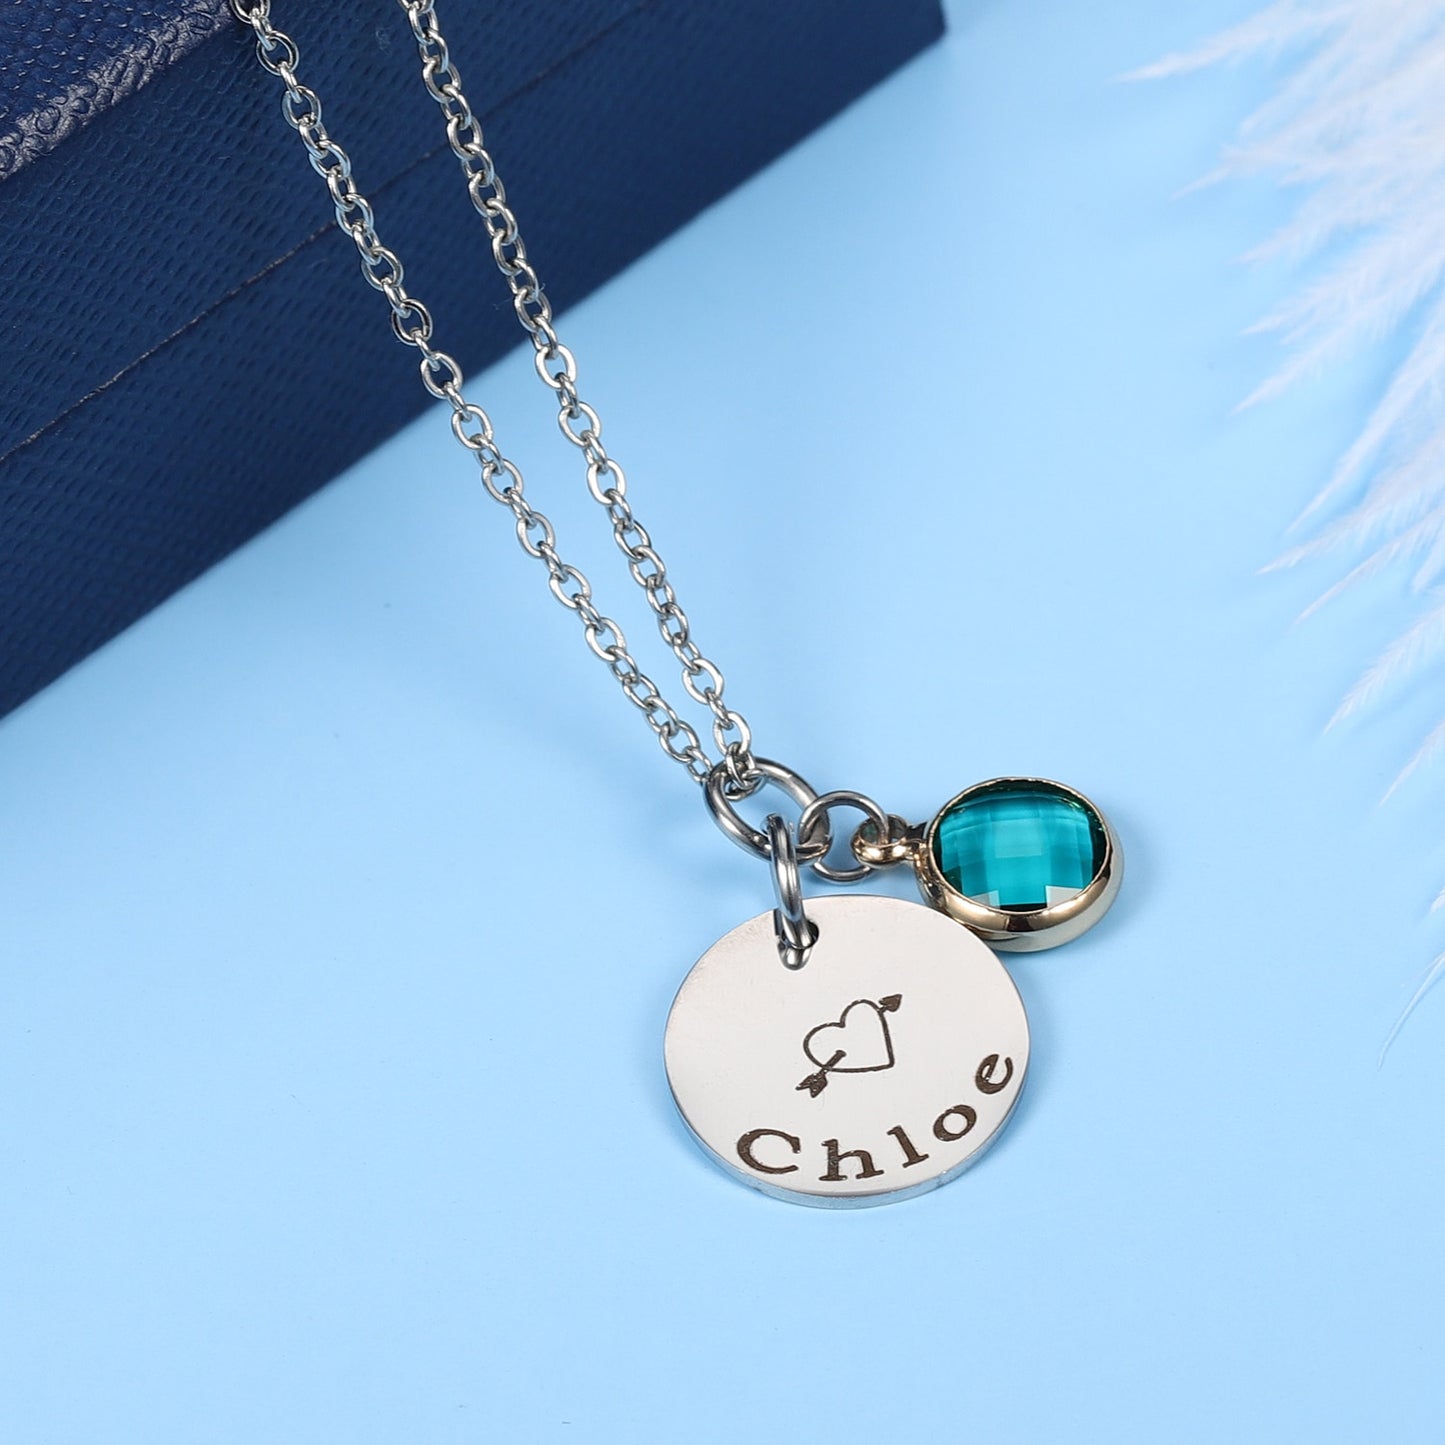 Personalized disc Engraved Name Necklace